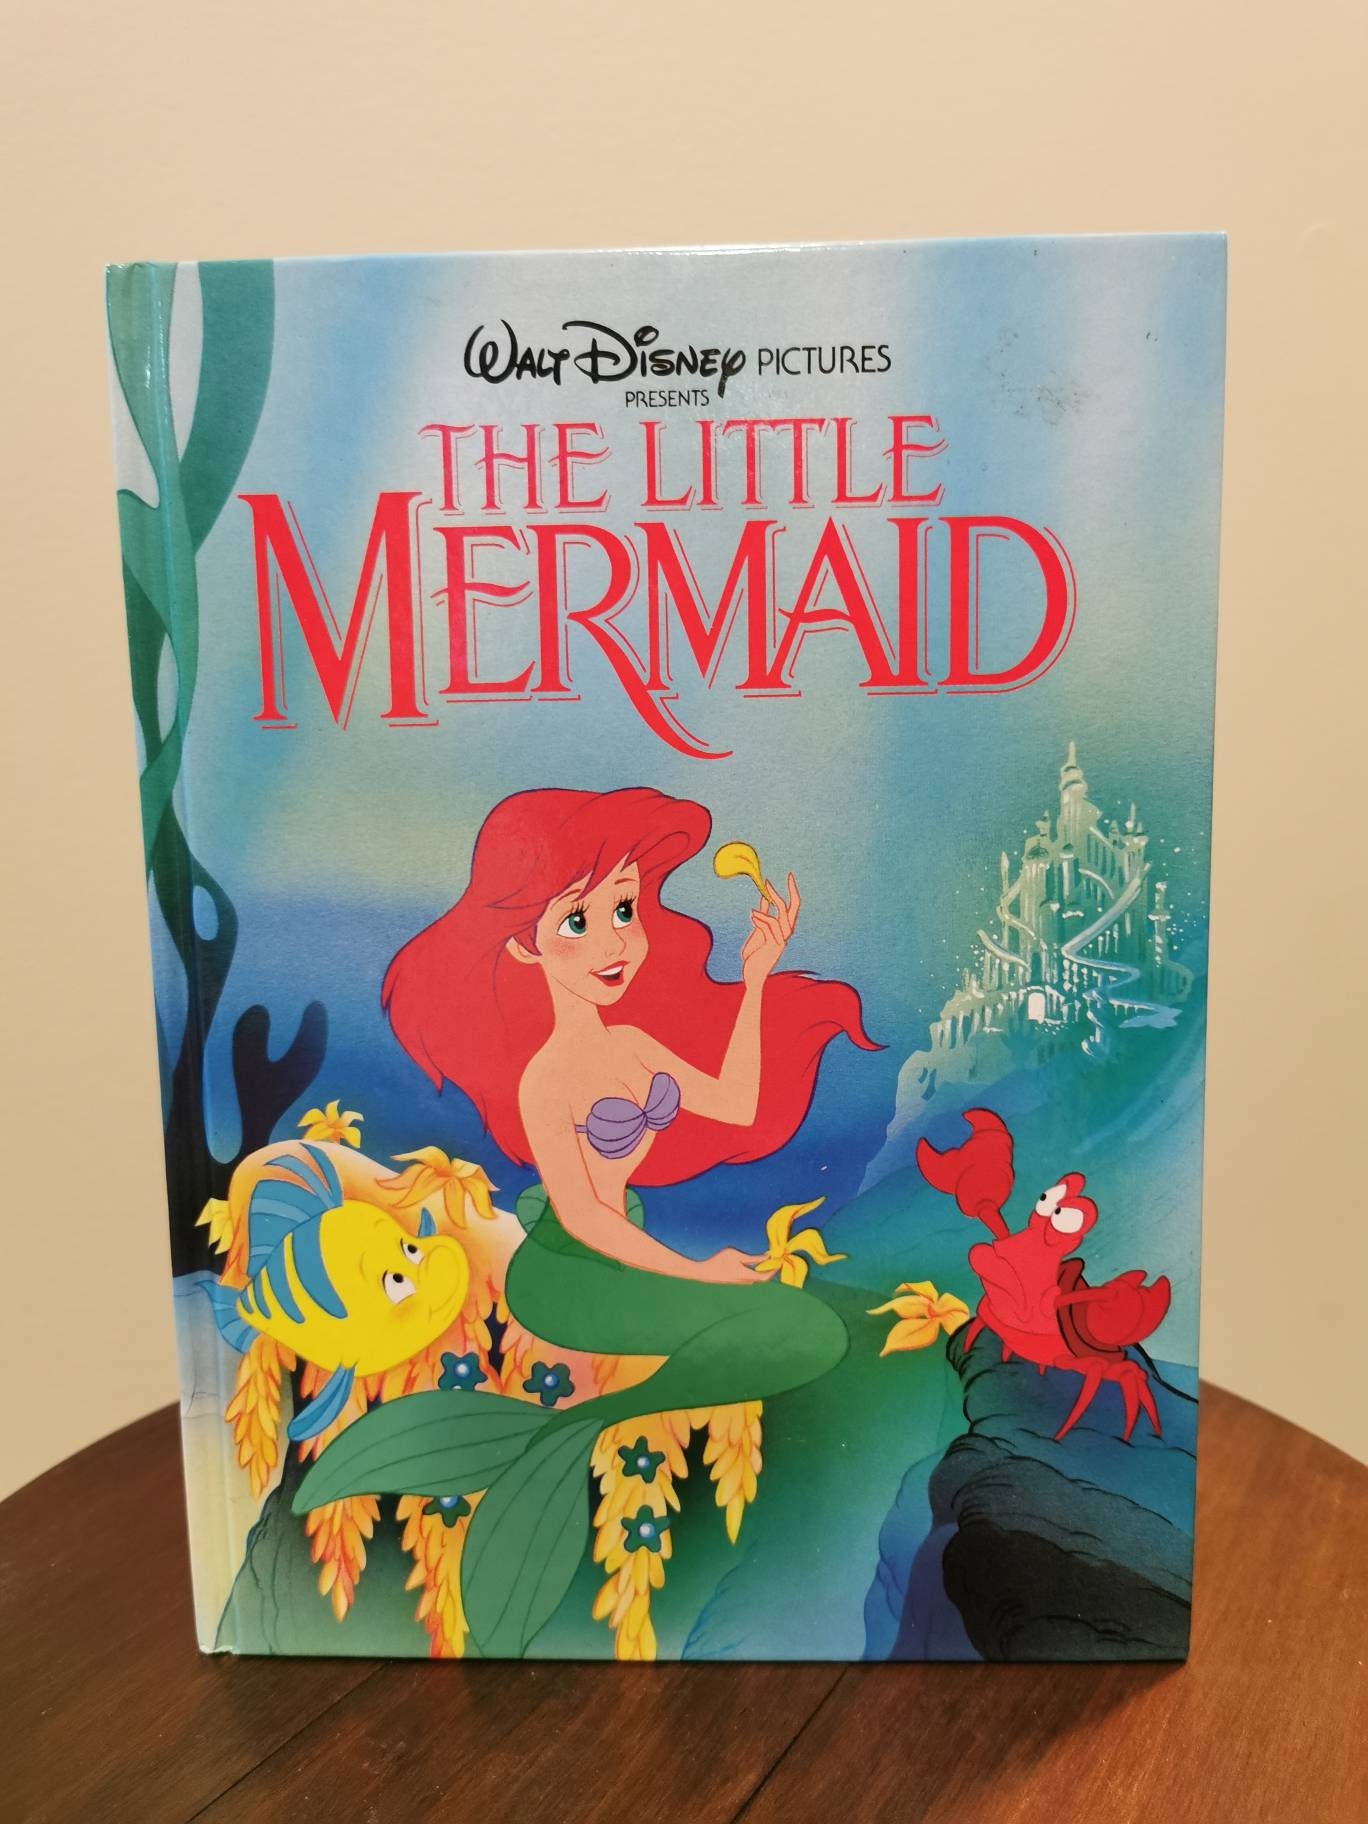 Vintage Disney The Little Mermaid Coloring Book Golden 1992 Well Loved